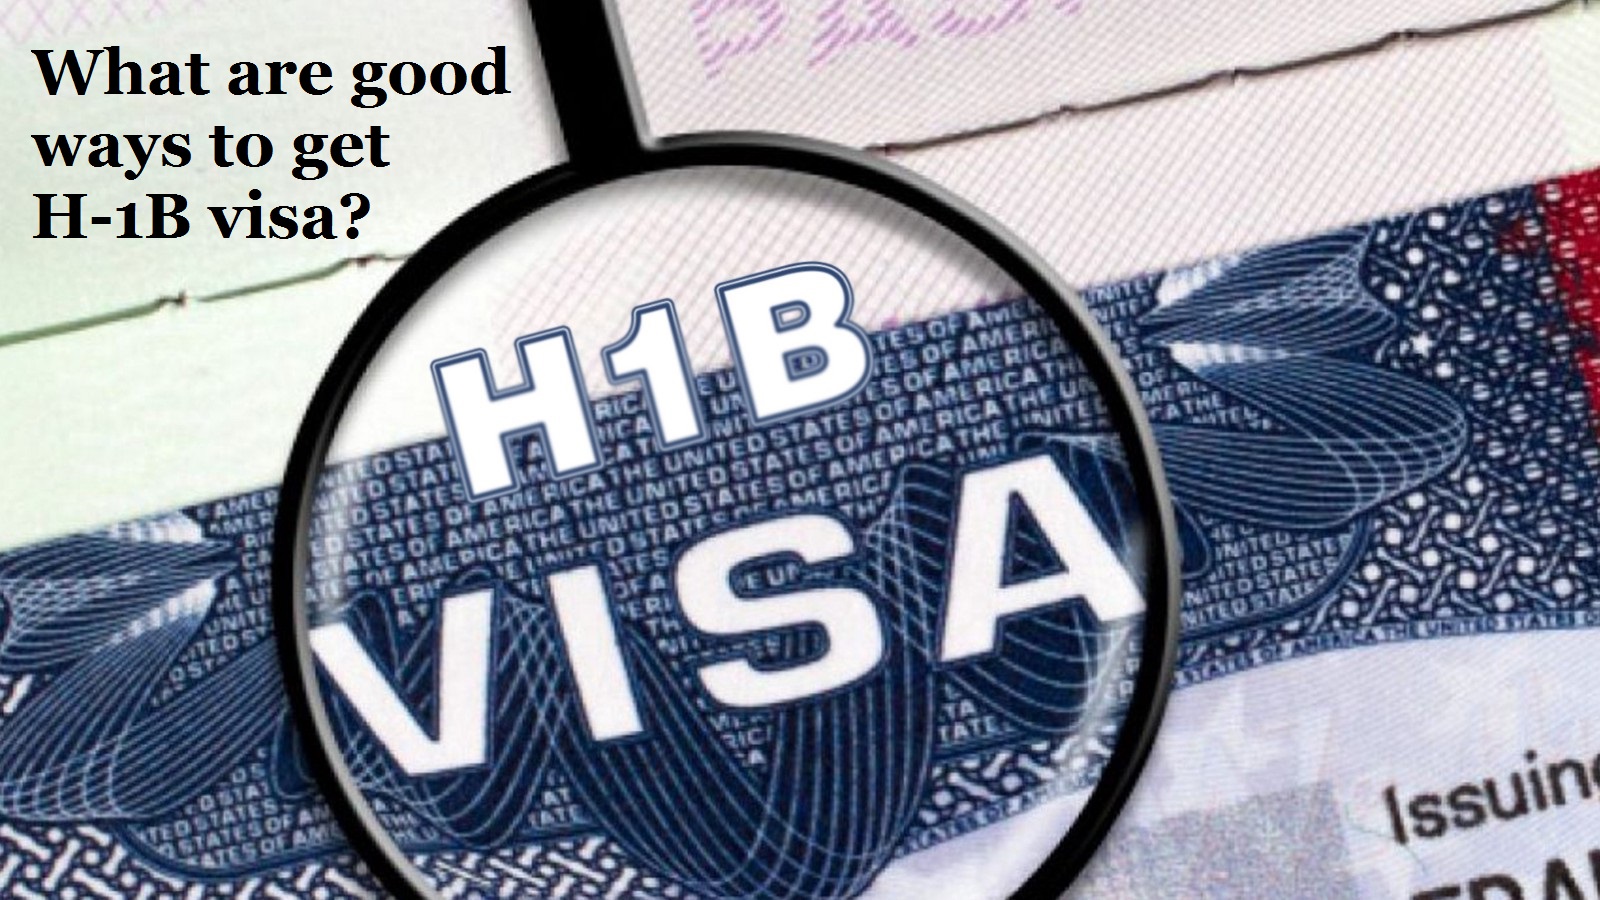 Following are the simplest 3 steps for applying for the H1-B visa: